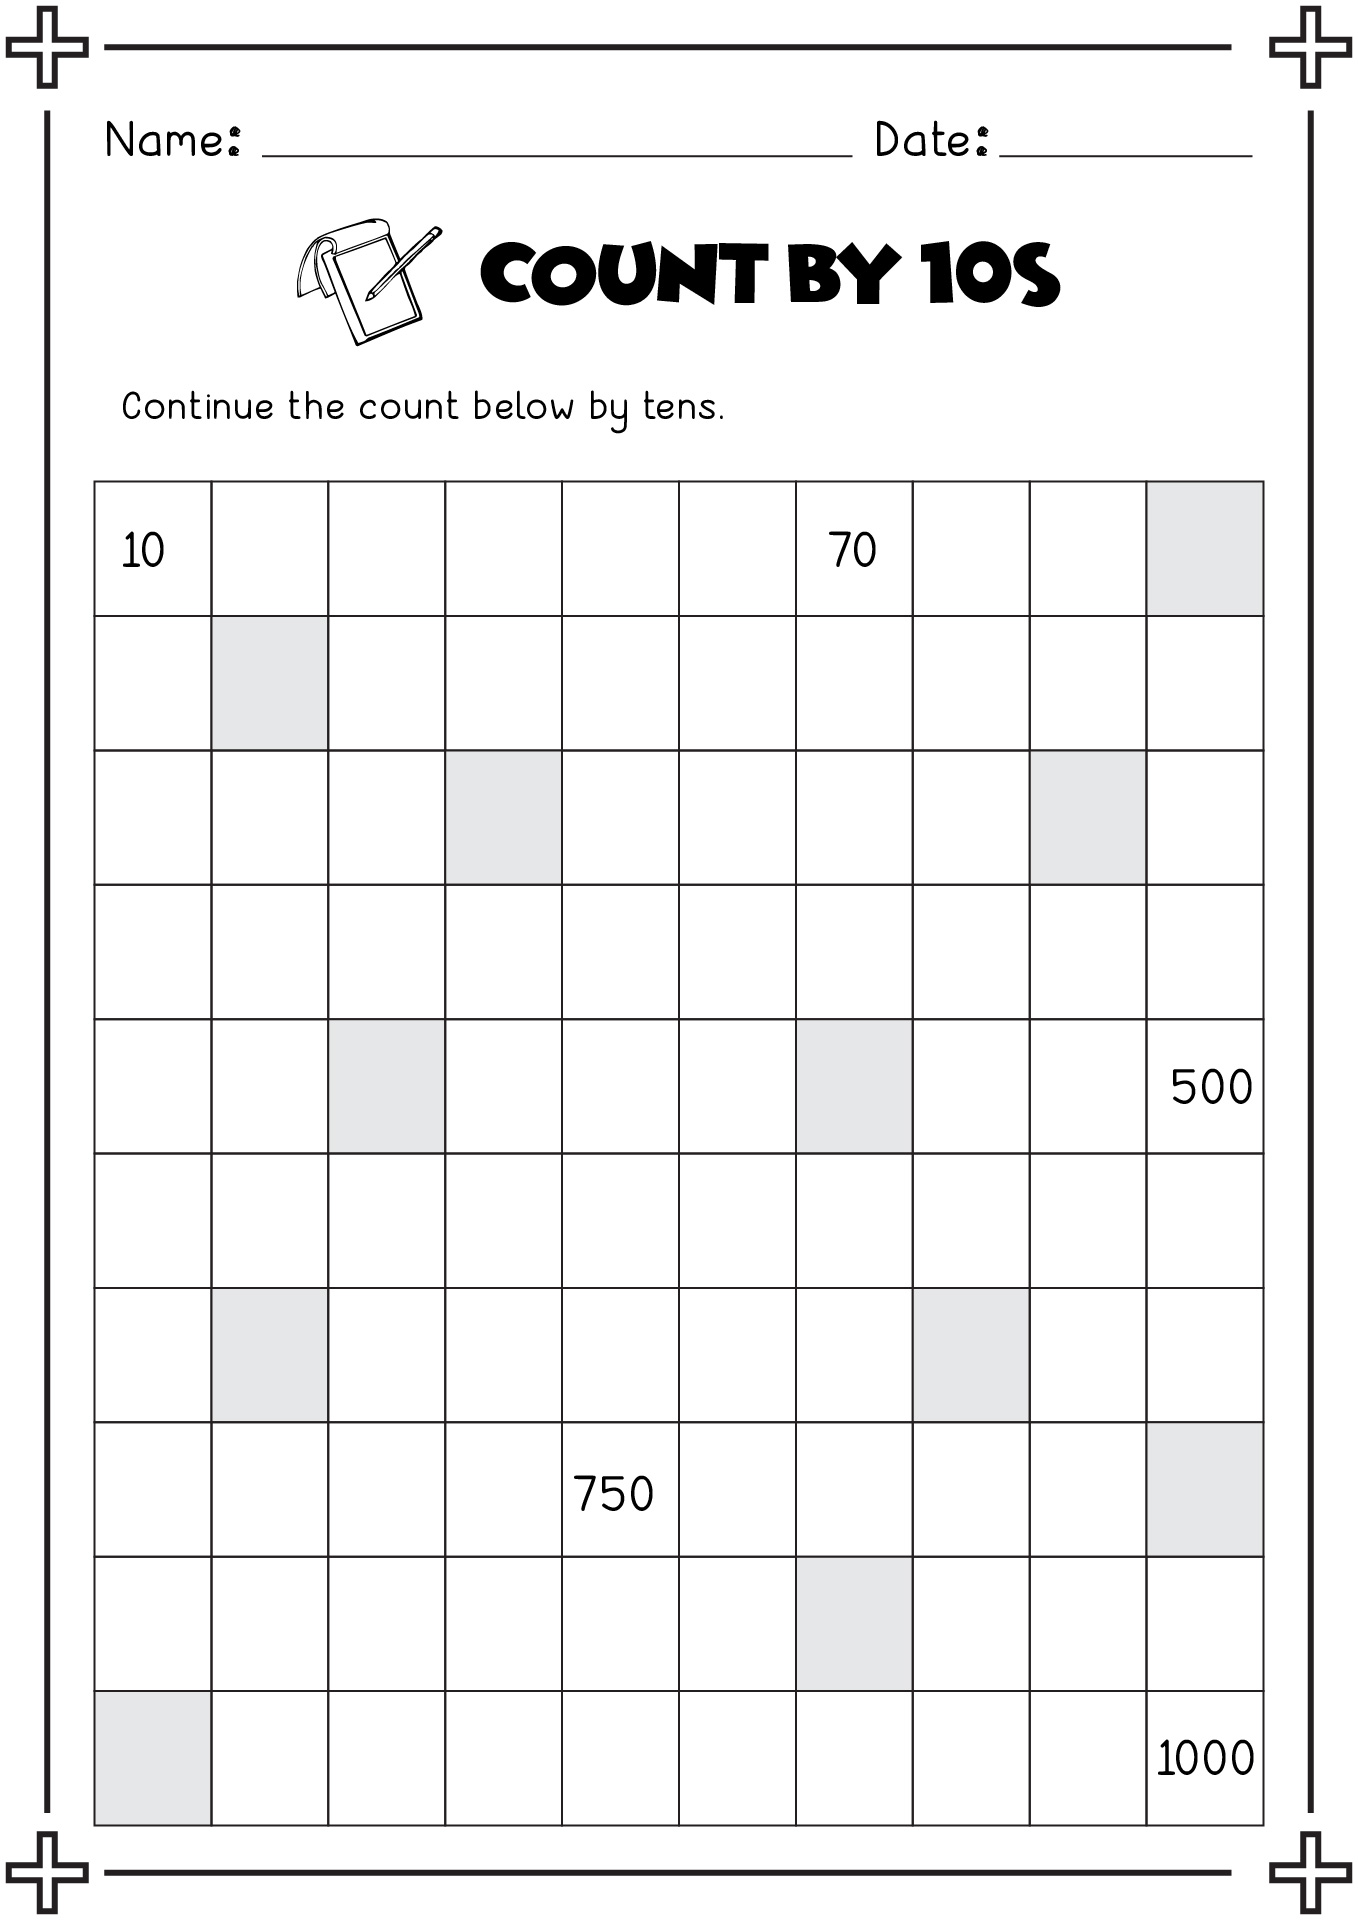 12 Best Images of Counting Numbers To 1000 Worksheets - Skip Counting